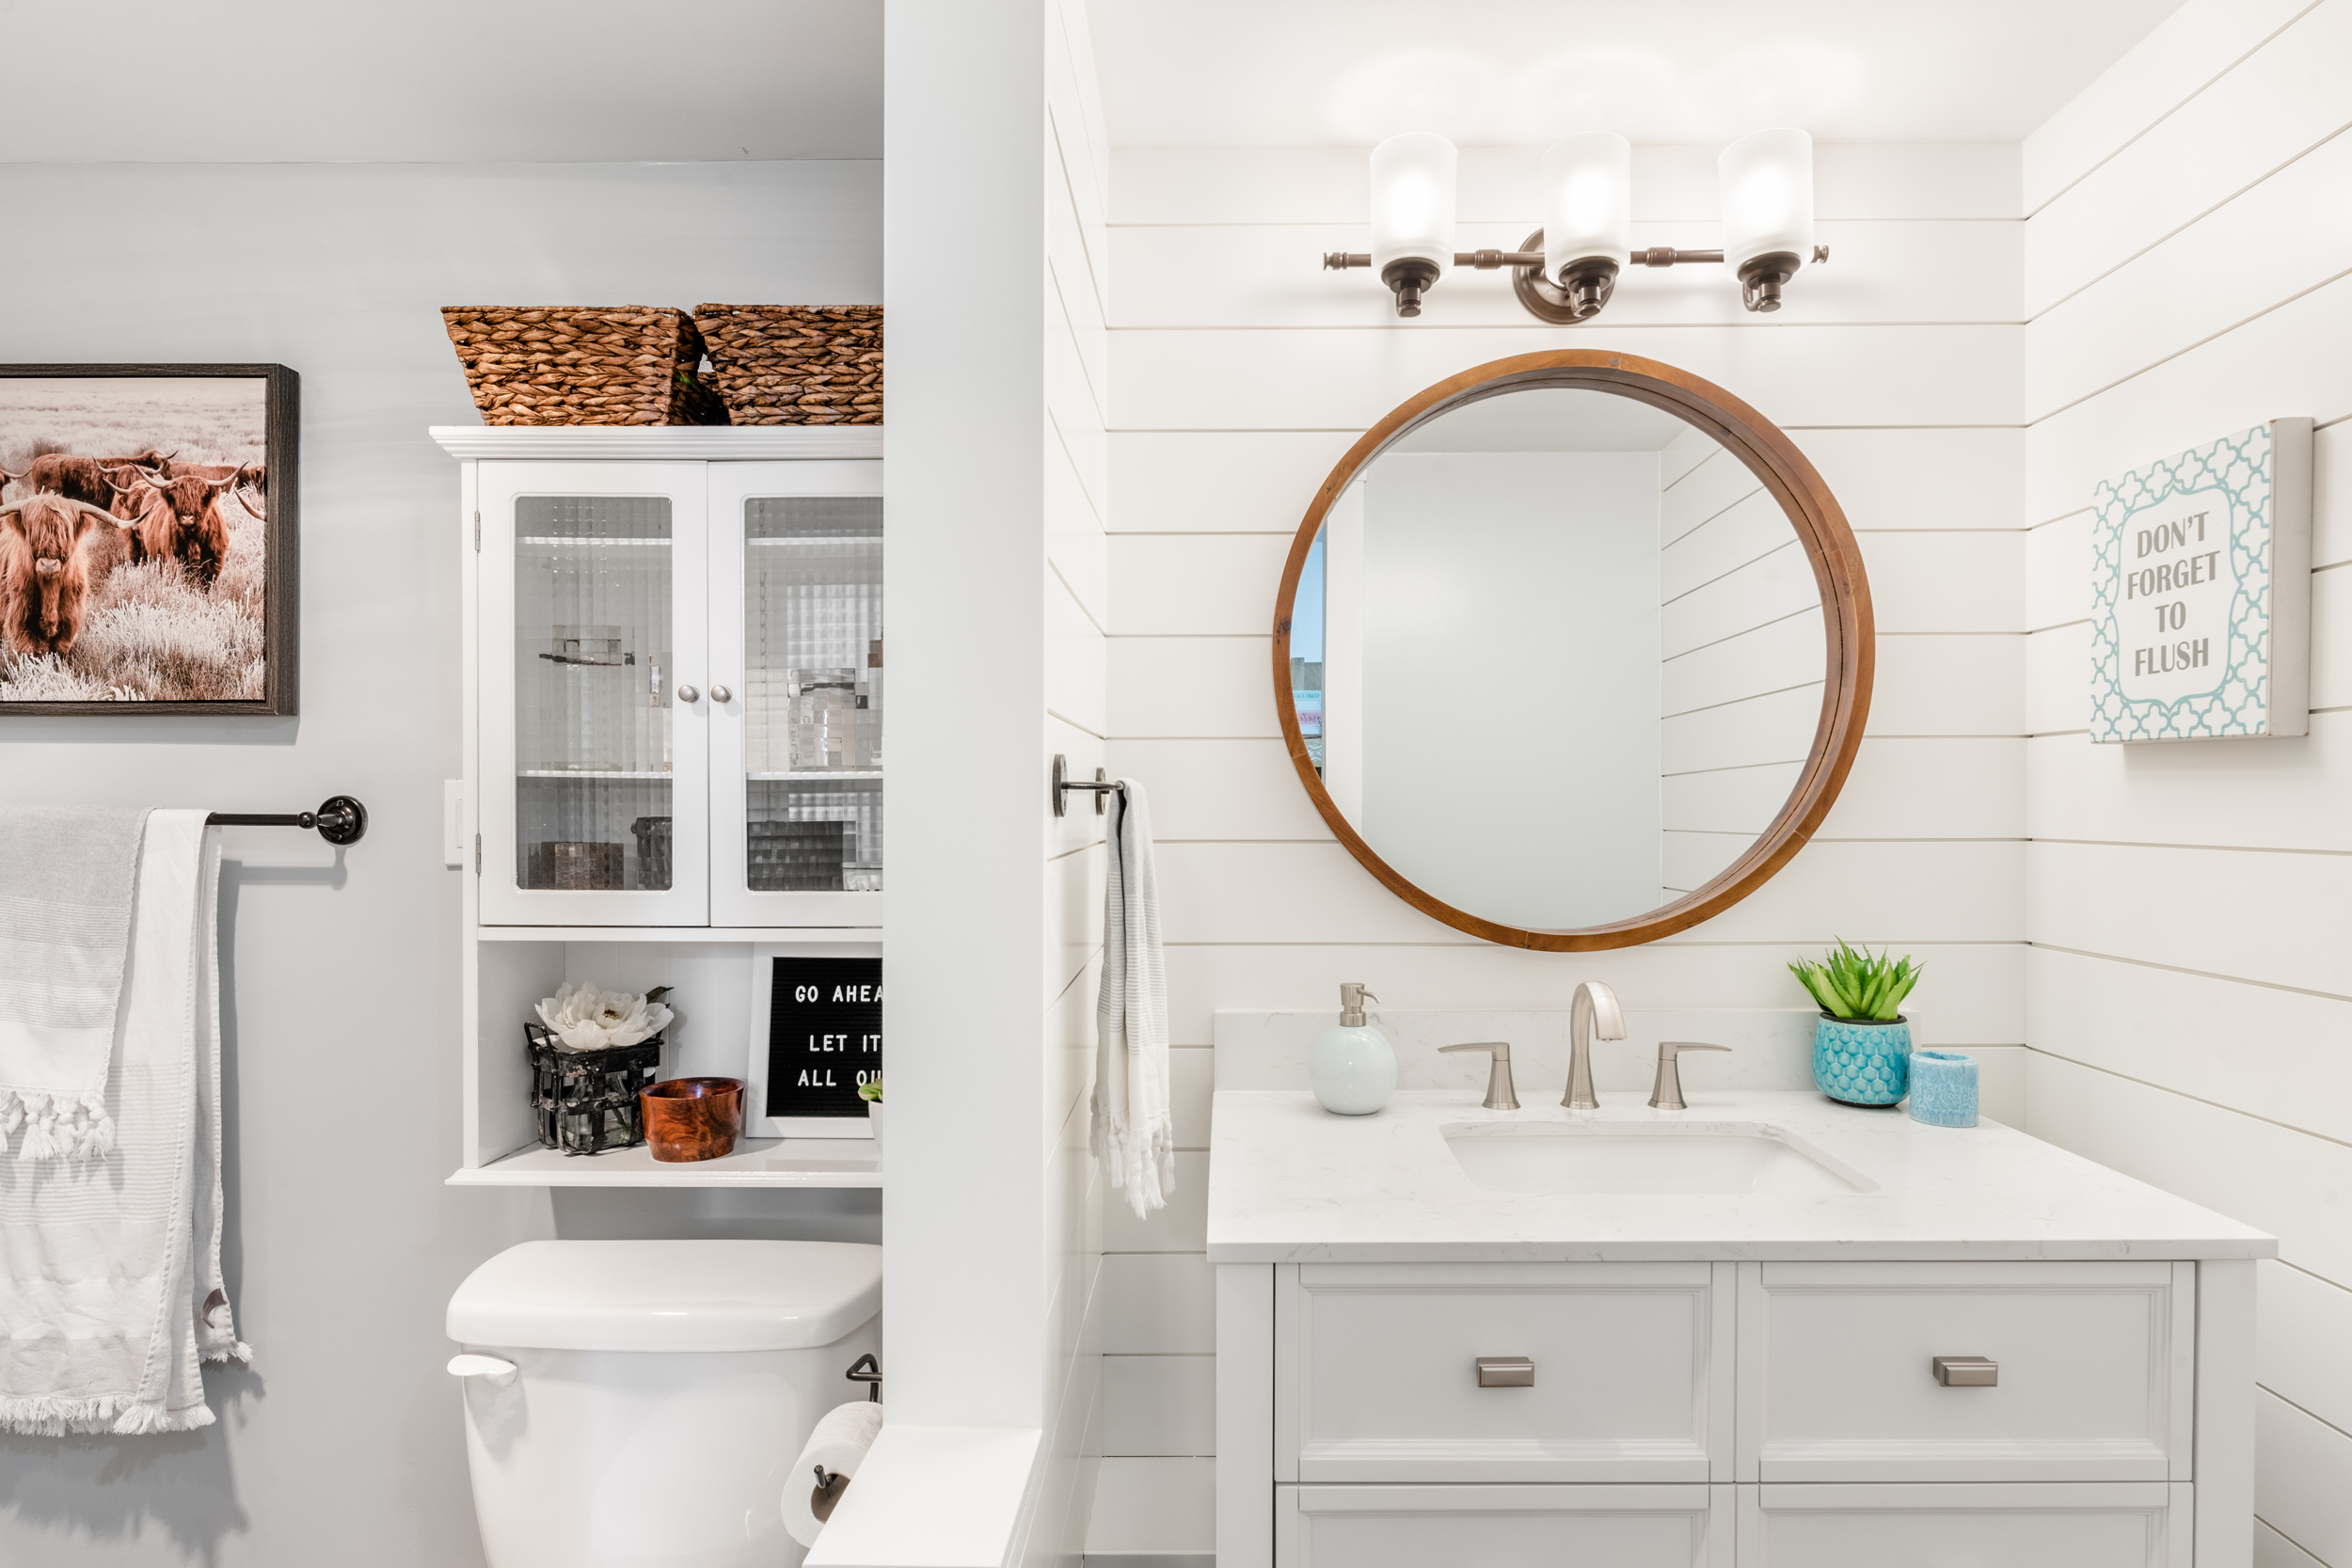 newly updated bathroom with white shiplap feature walls around the vanity